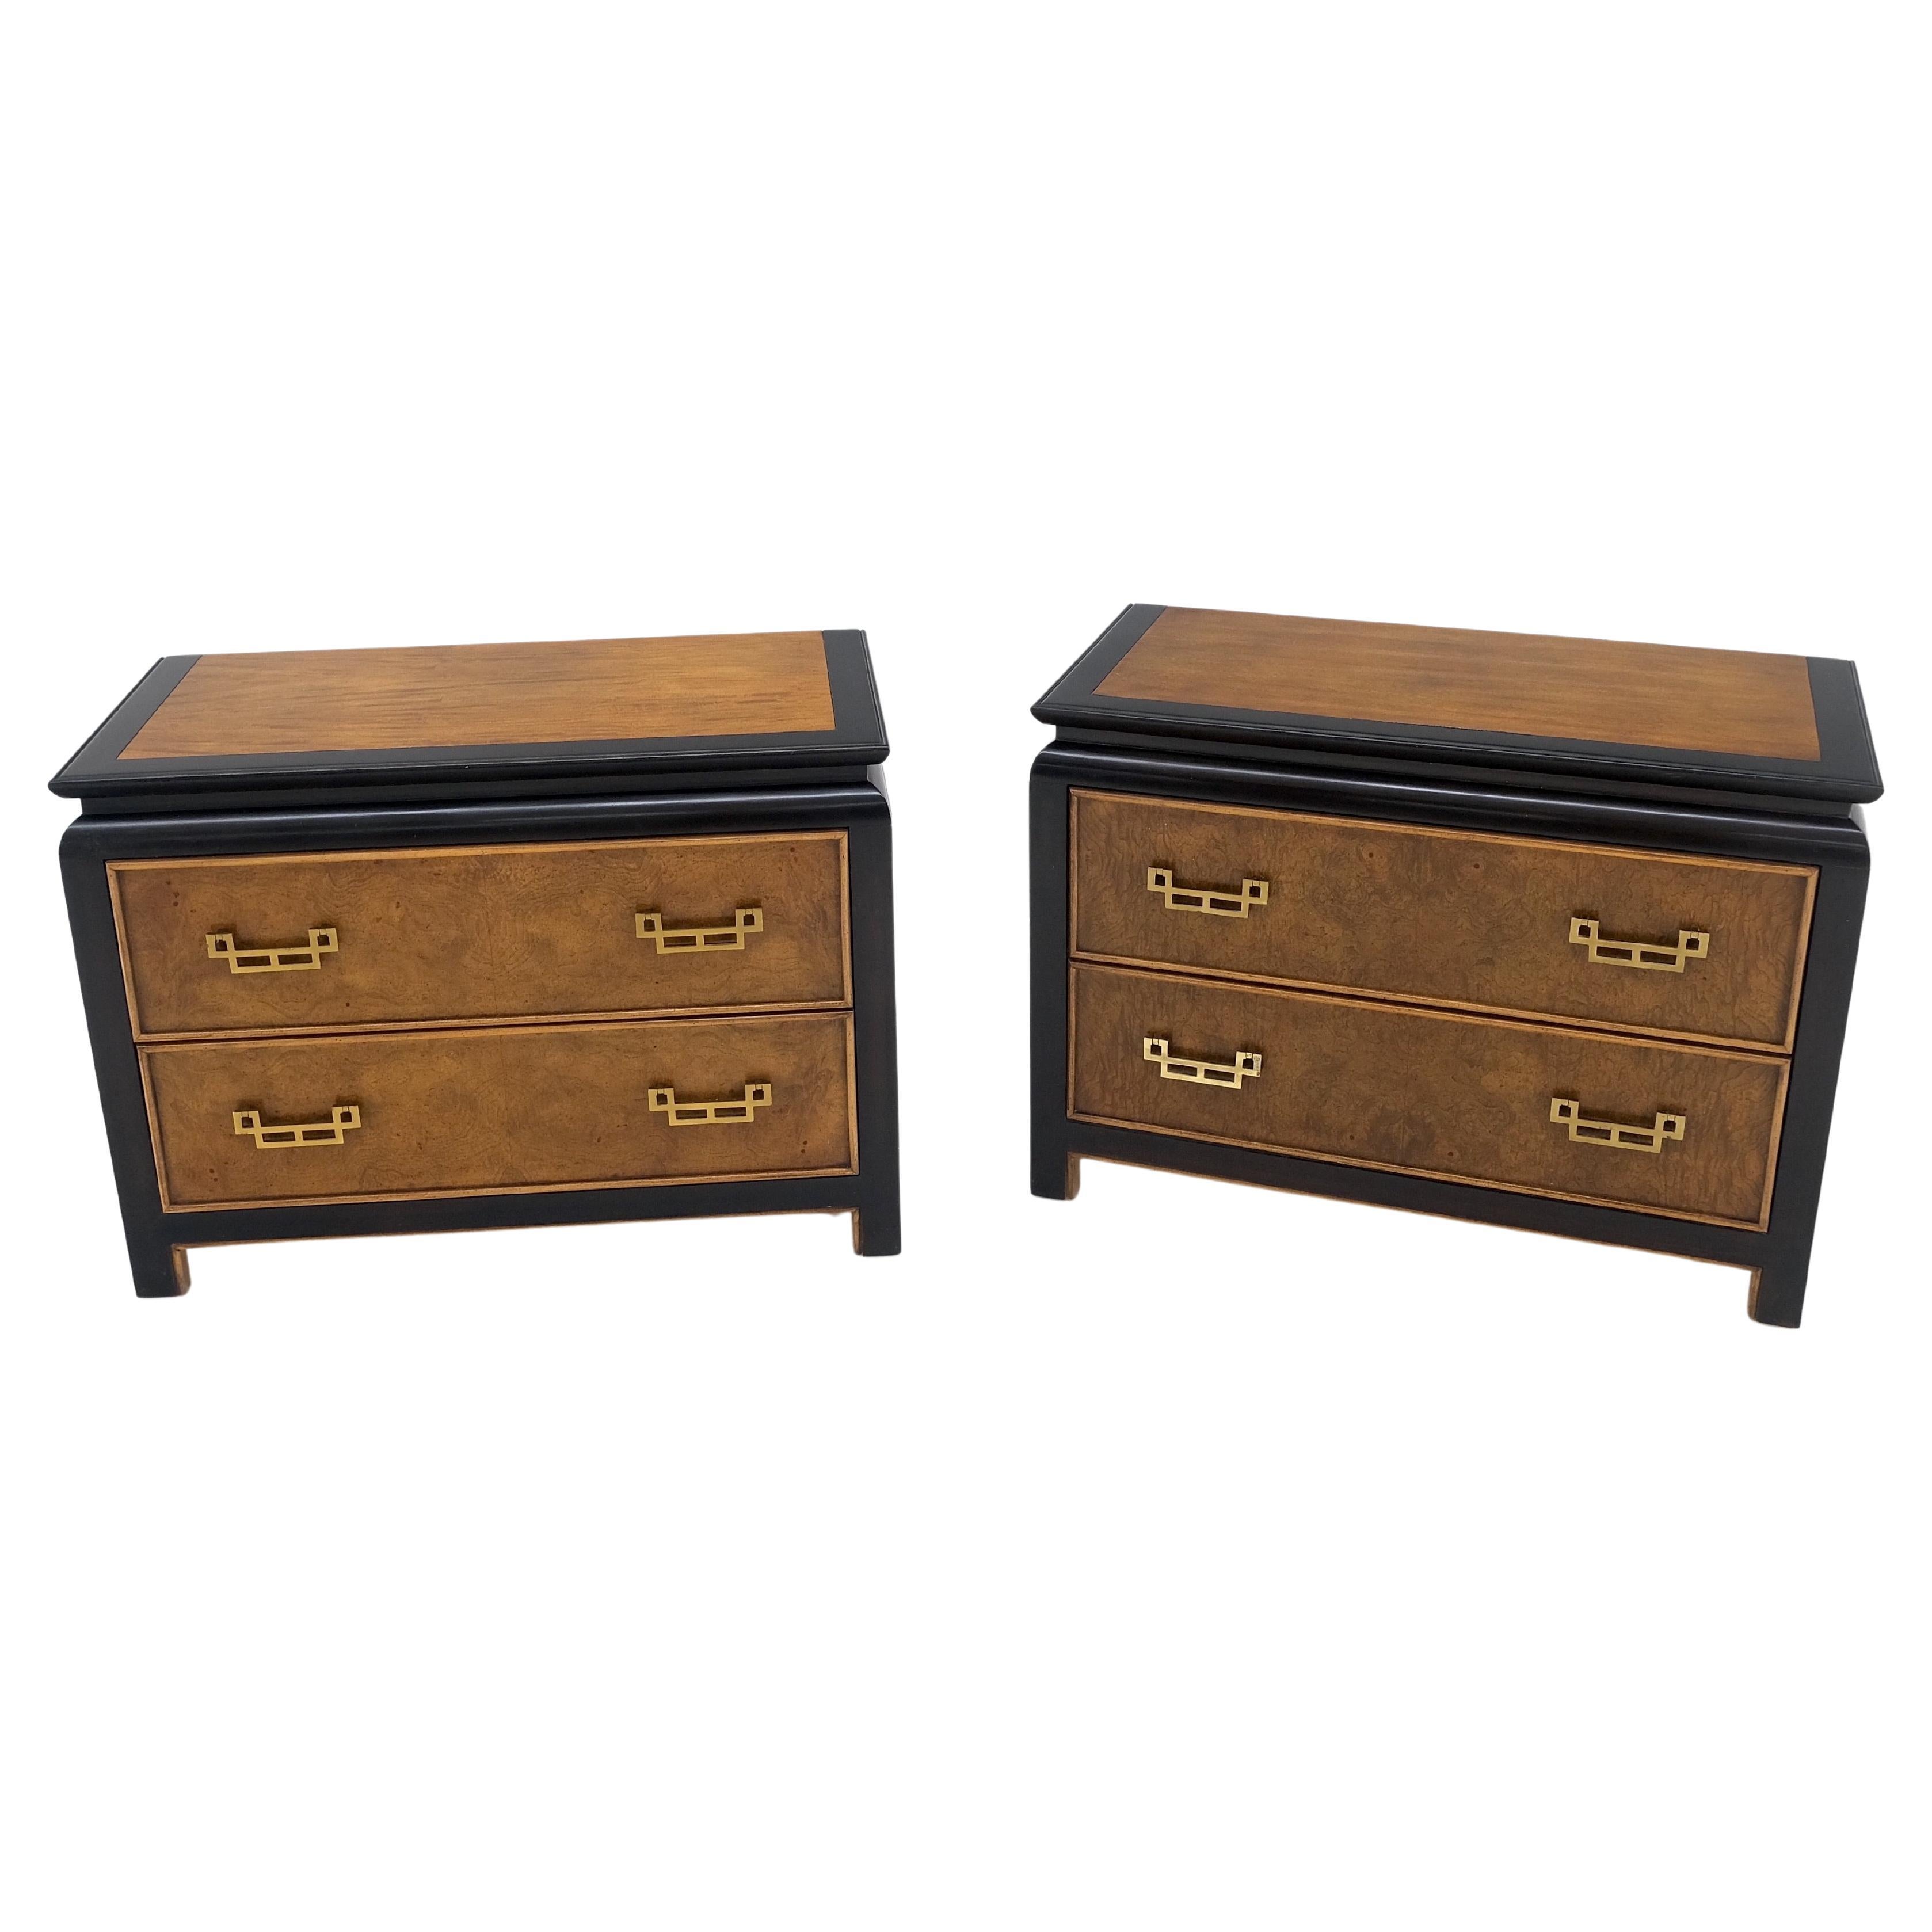 Pair Burl Wood Black Lacquer Solid Brass Drop Pull 2 Drawer Night Stands MINT! For Sale